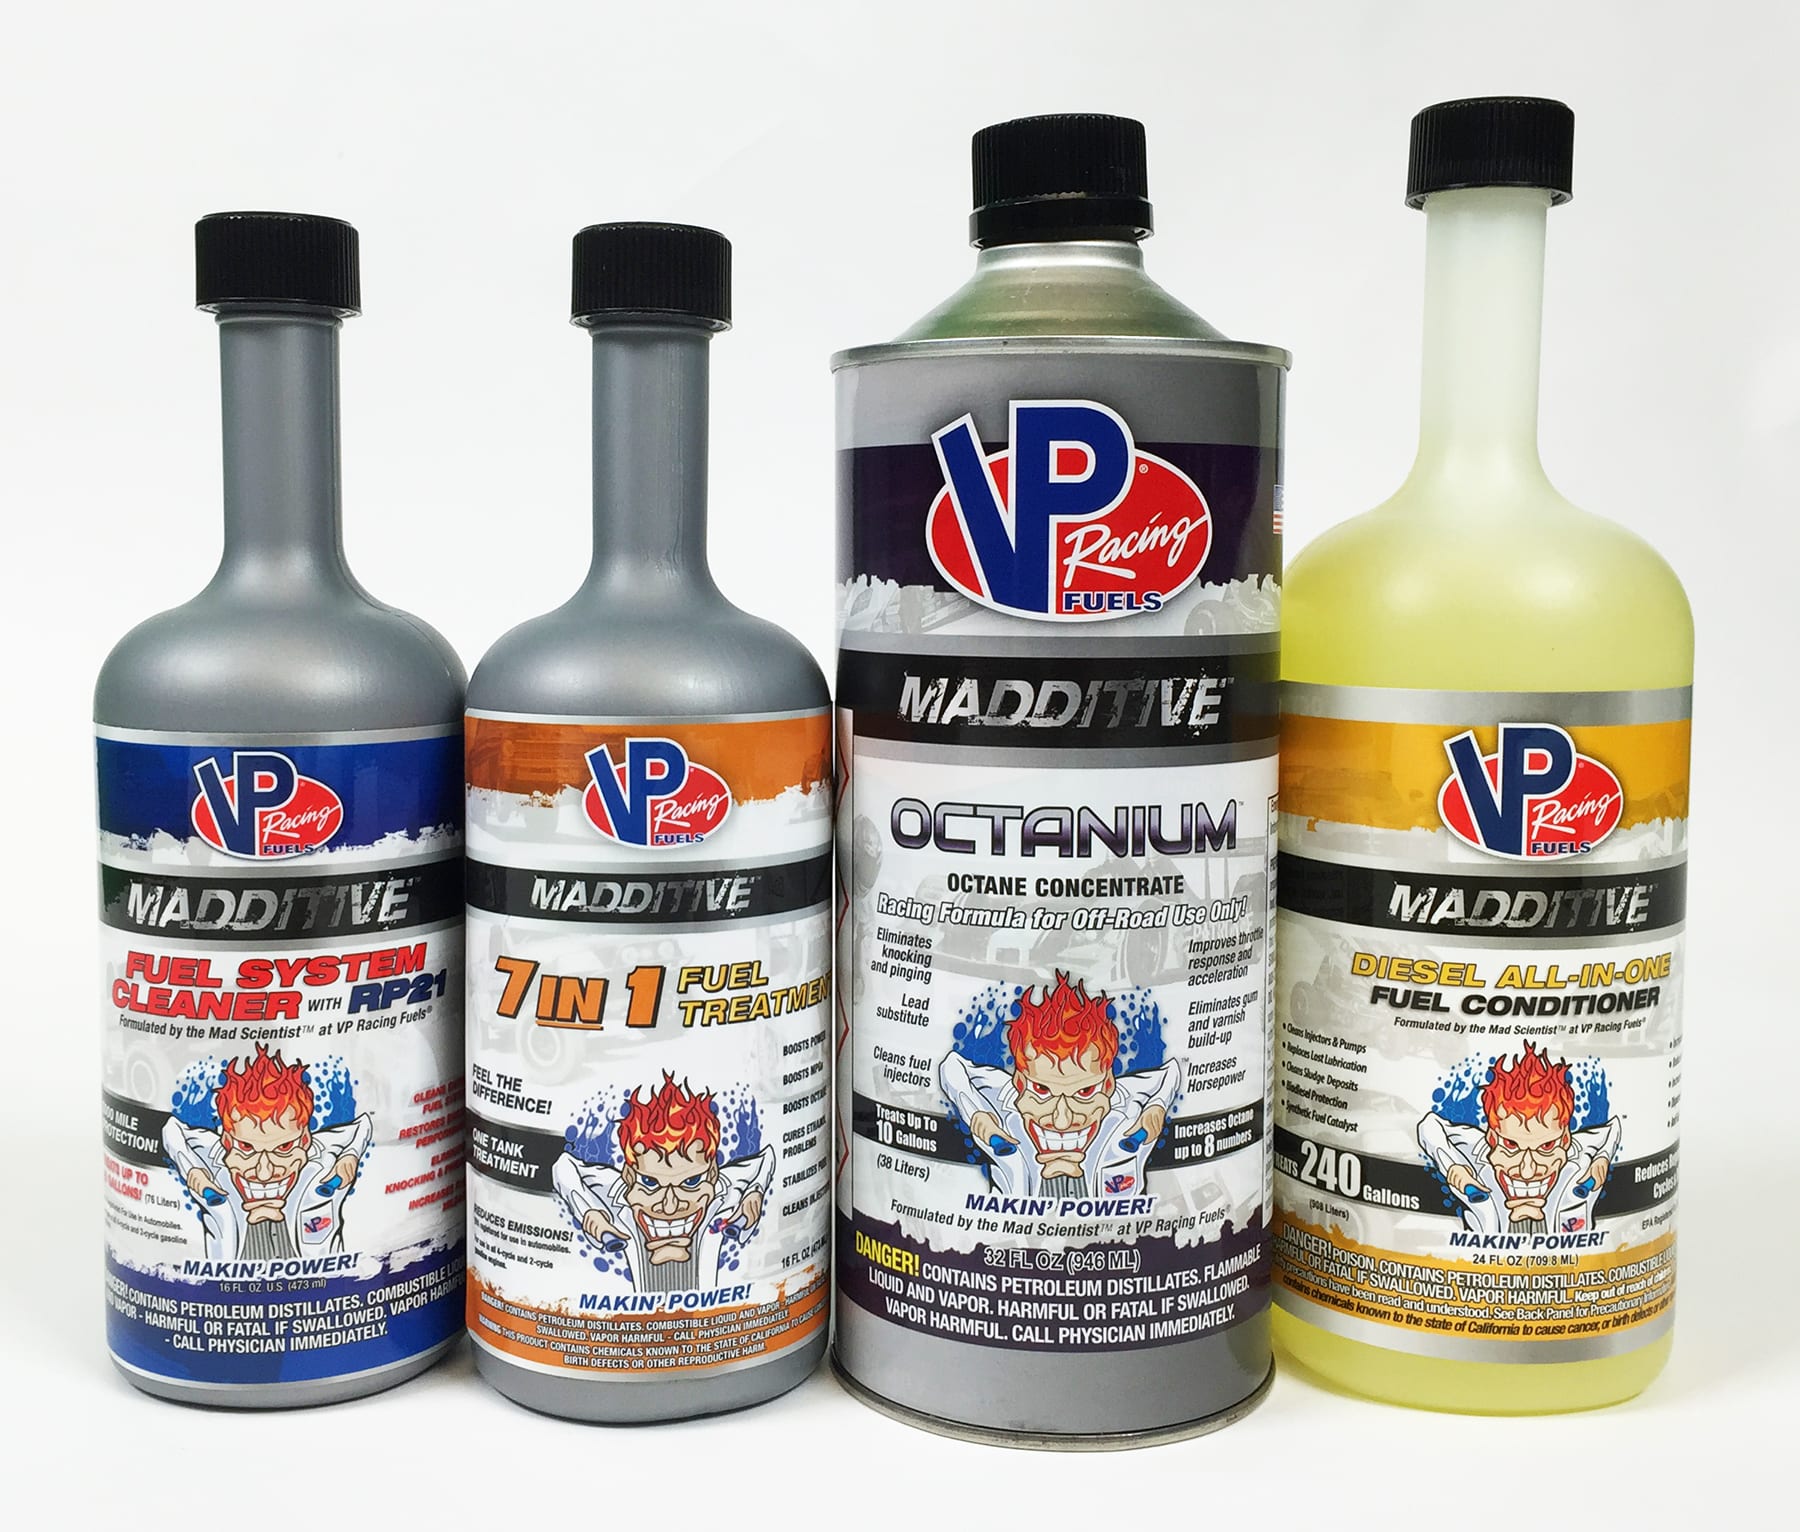 VP MADDITIVES® AND VP SMALL ENGINE FUELS NOW AT AUTOZONE